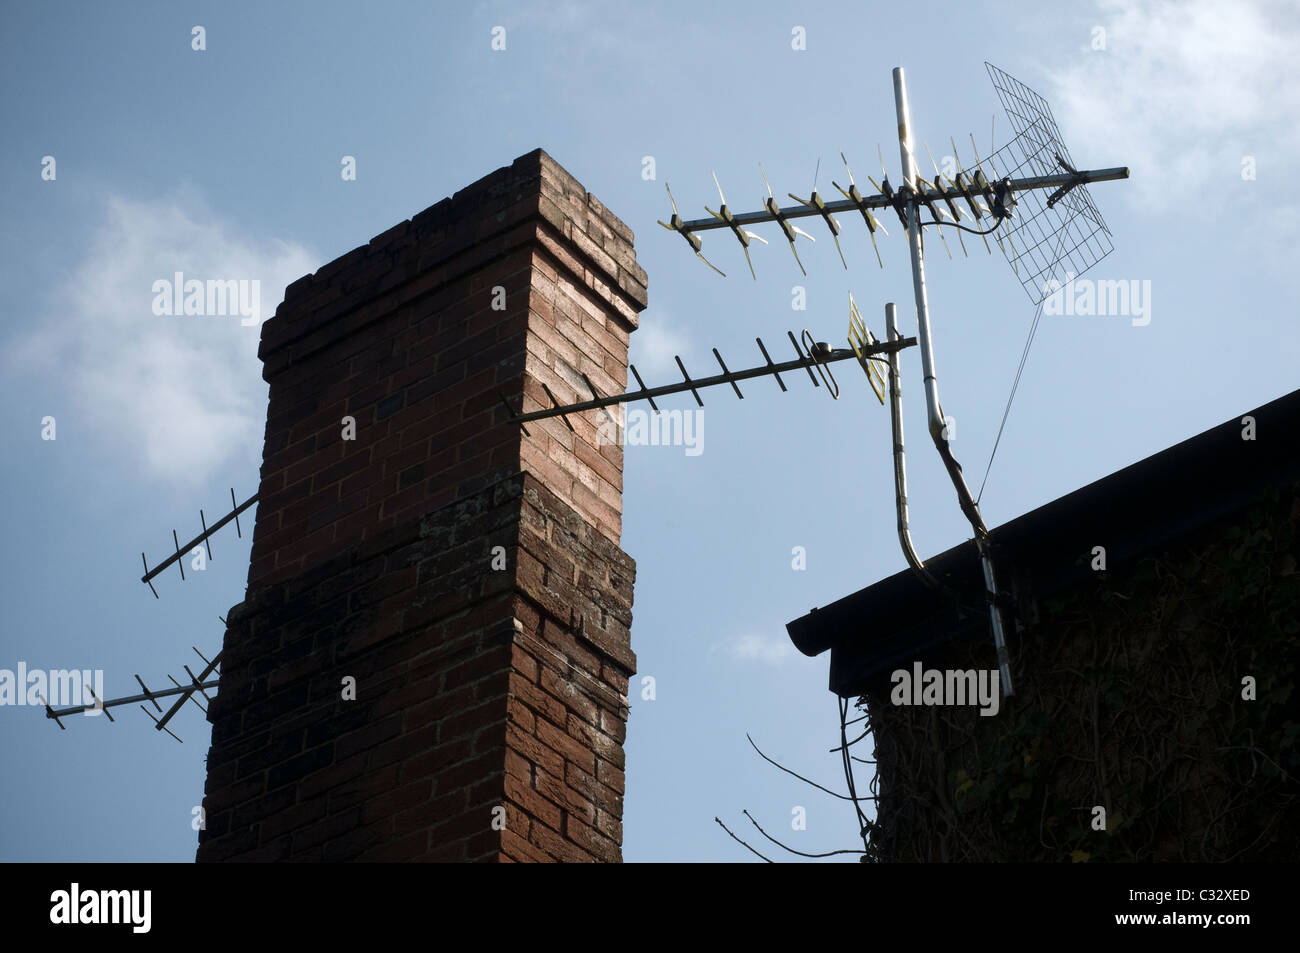 tv areals and chimney stack,television, tv television licence, aerial, aerials, roof, abstract, brickwork, Stock Photo